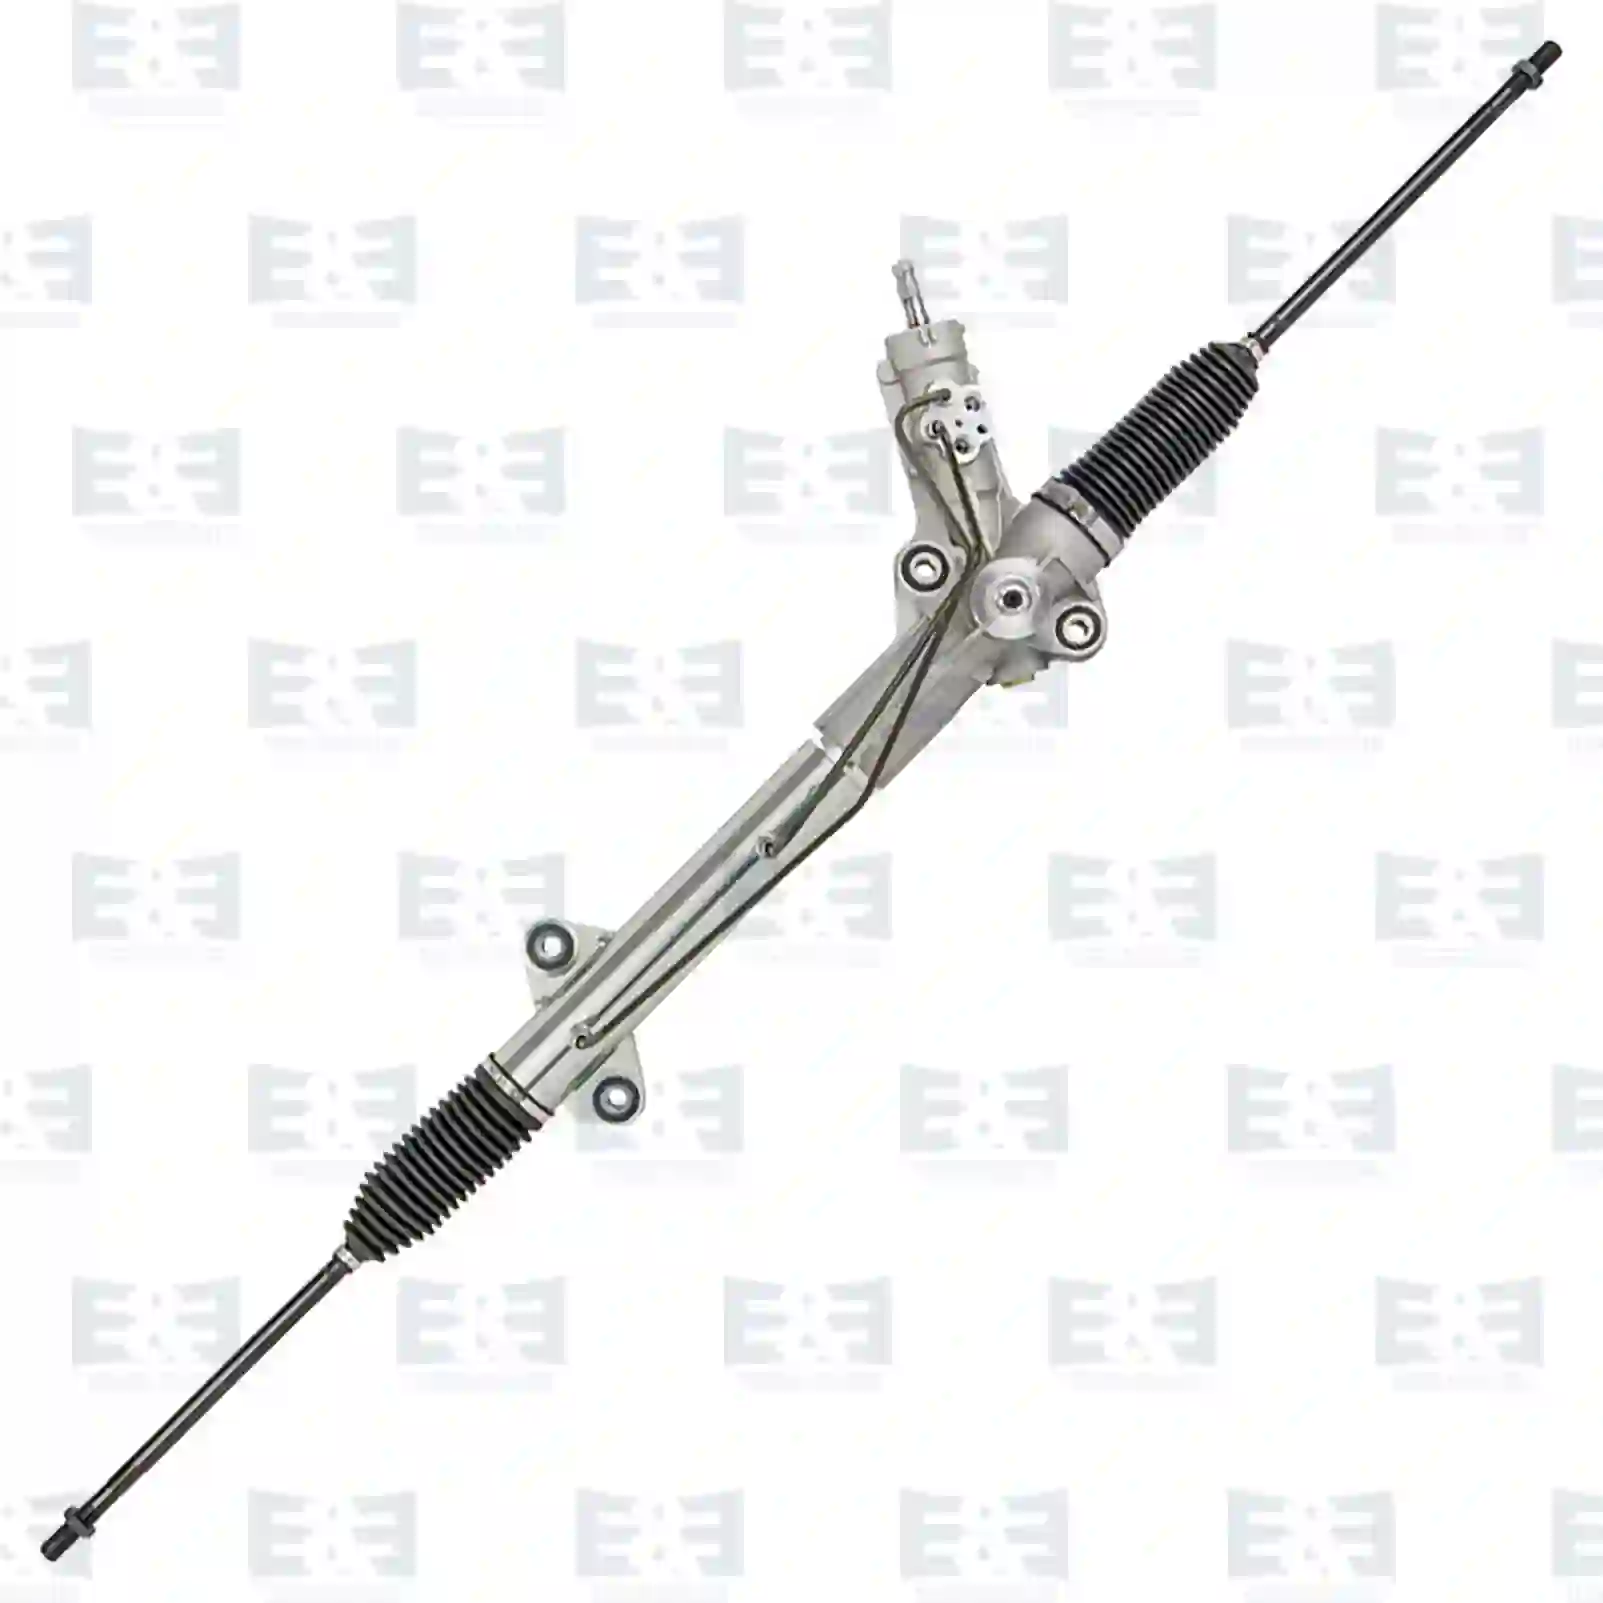 Steering Box Steering gear, without ball joints, EE No 2E2205623 ,  oem no:68012180AA, 68034032AA, 68048697AA, 9064600200, 906460020080, 9064600400, 9064600600, 9064600800, 9064601300, 9064601500, 9064601700, 2E1419061, 2E1419061A, 2E1419061AX, 2E1419061B, 2E1419061BX, 2E1419061C, 2E1419061CX, 2E1422055A, 2E1422055B, 2E1422055BX, 2E1422055G E&E Truck Spare Parts | Truck Spare Parts, Auotomotive Spare Parts